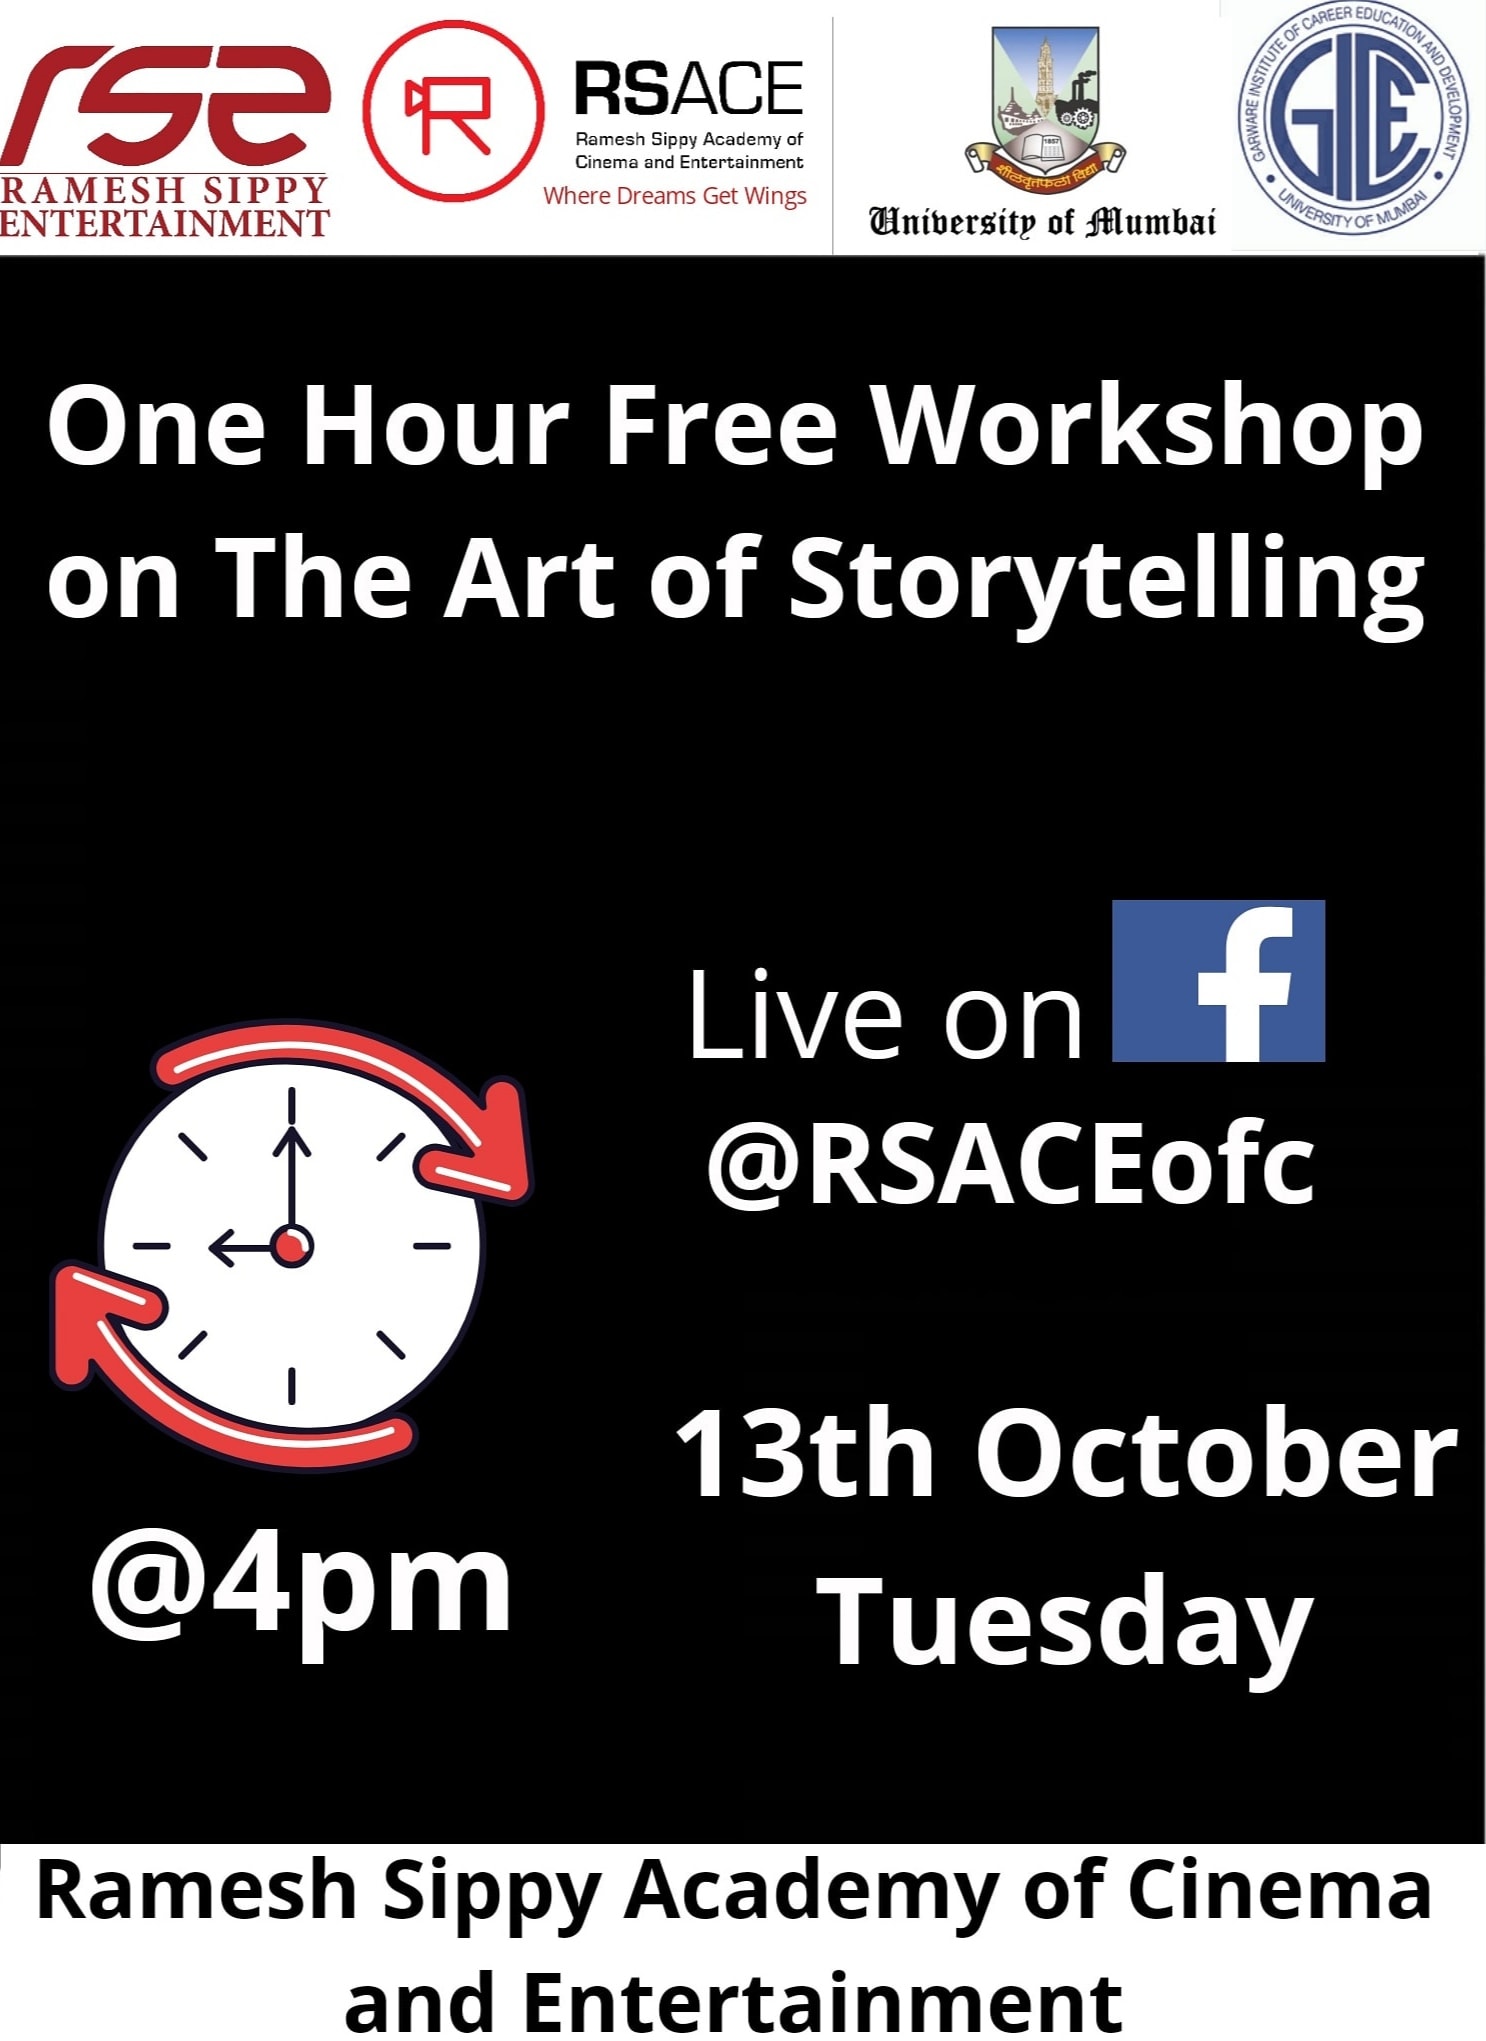 One Hour Free Workshop On The Art Of Storytelling